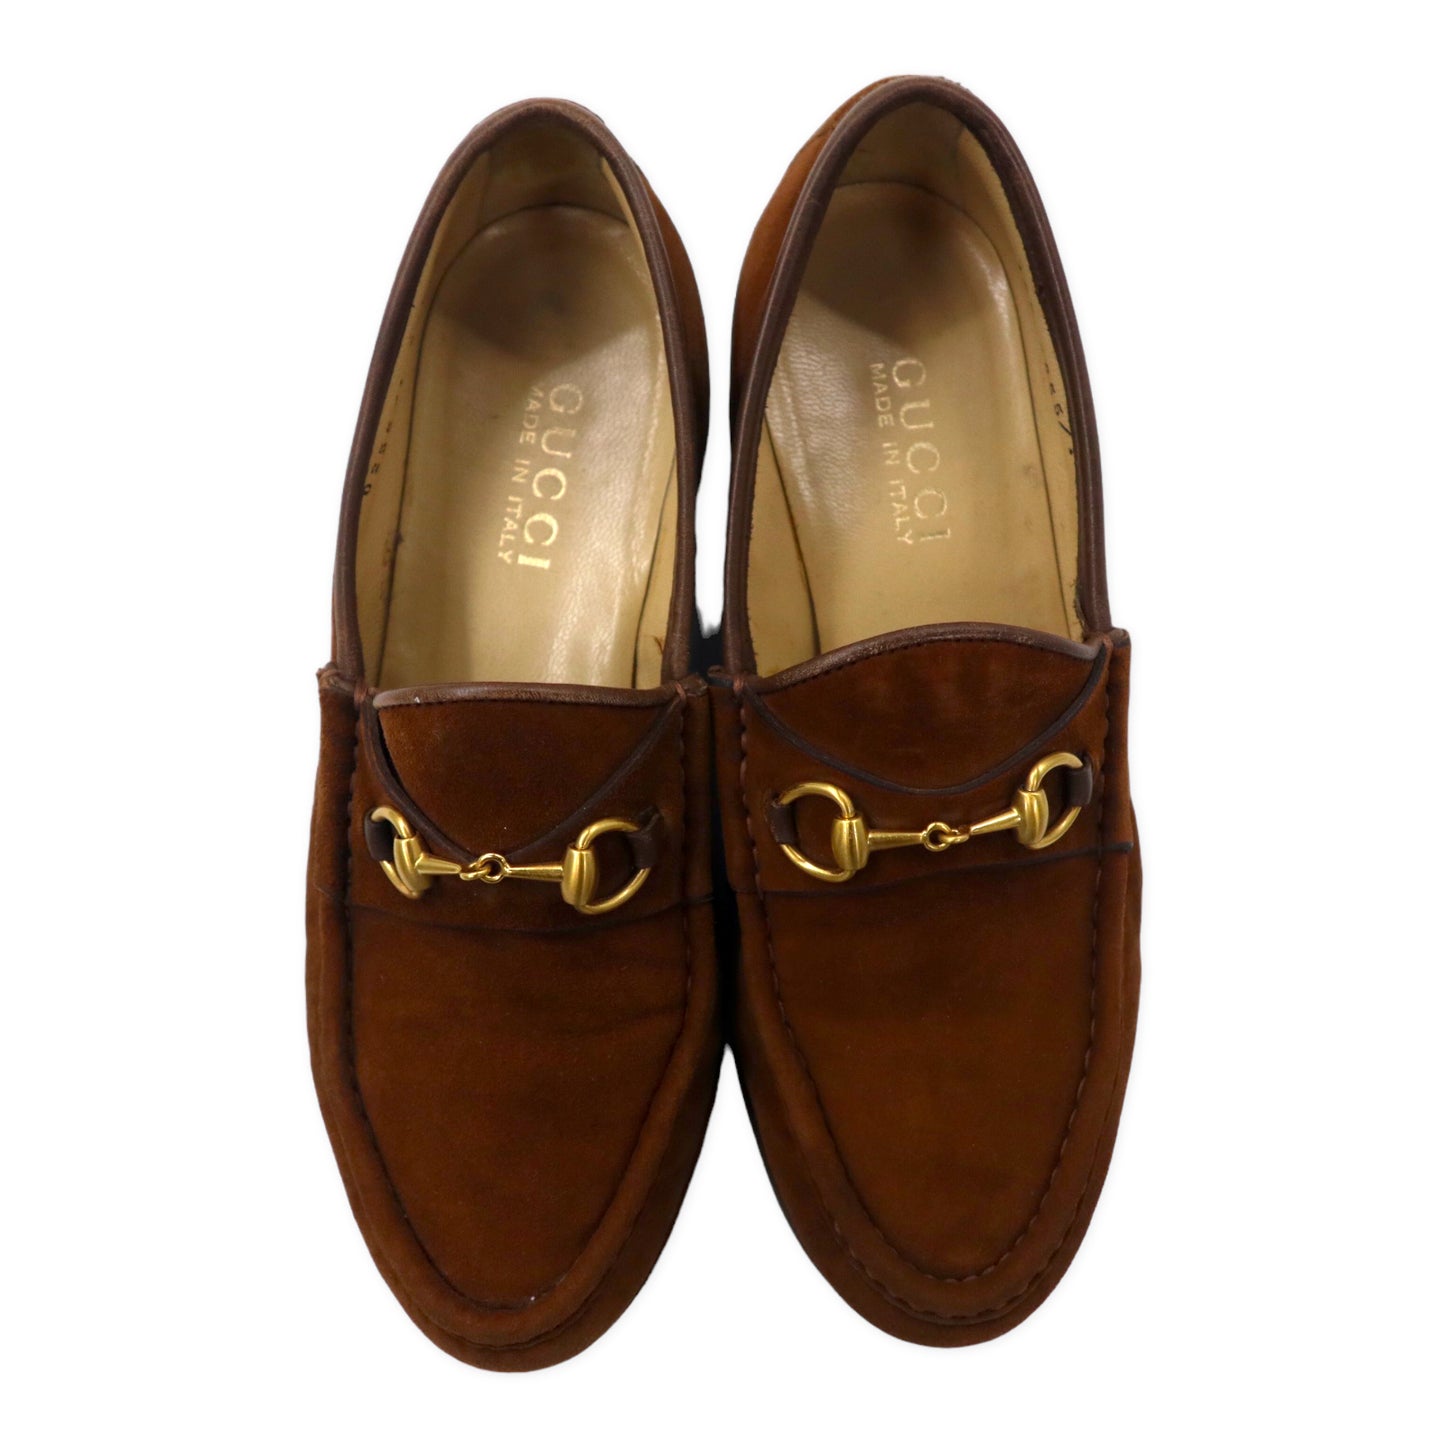 GUCCI Horsebit LOAFERS US6.5 Brown SUEDE Leather 100 0255 /1